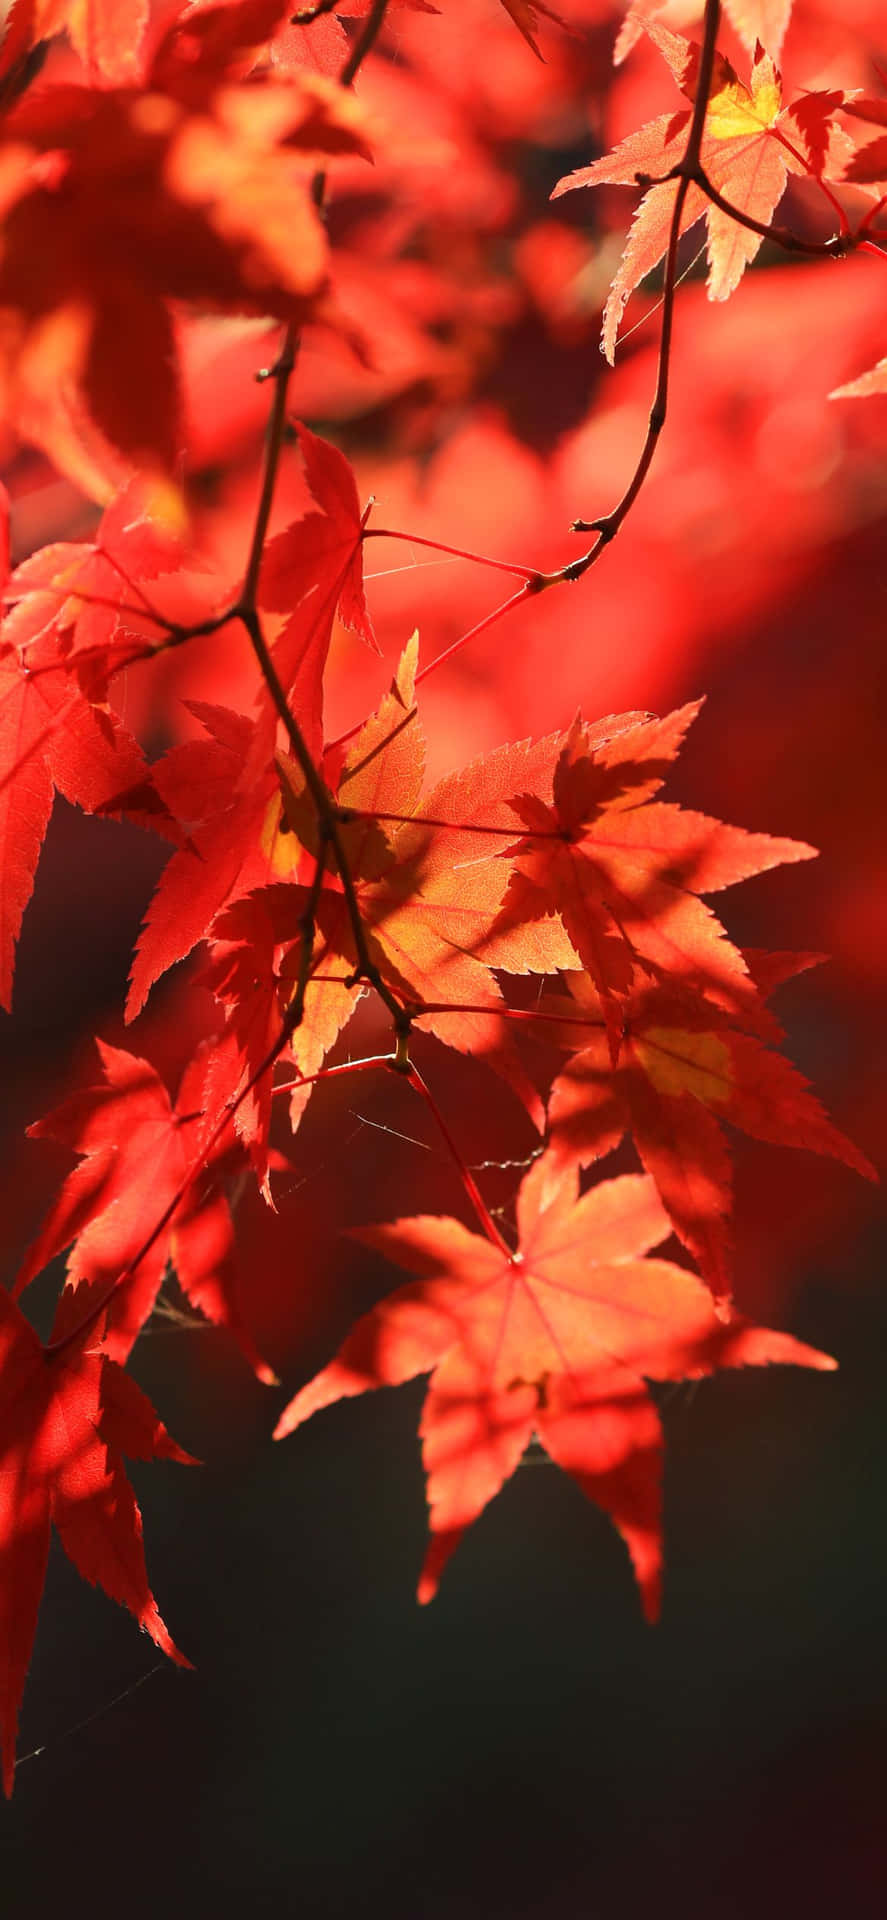 Enjoy the sight of red and golden leaves in the best Fall!